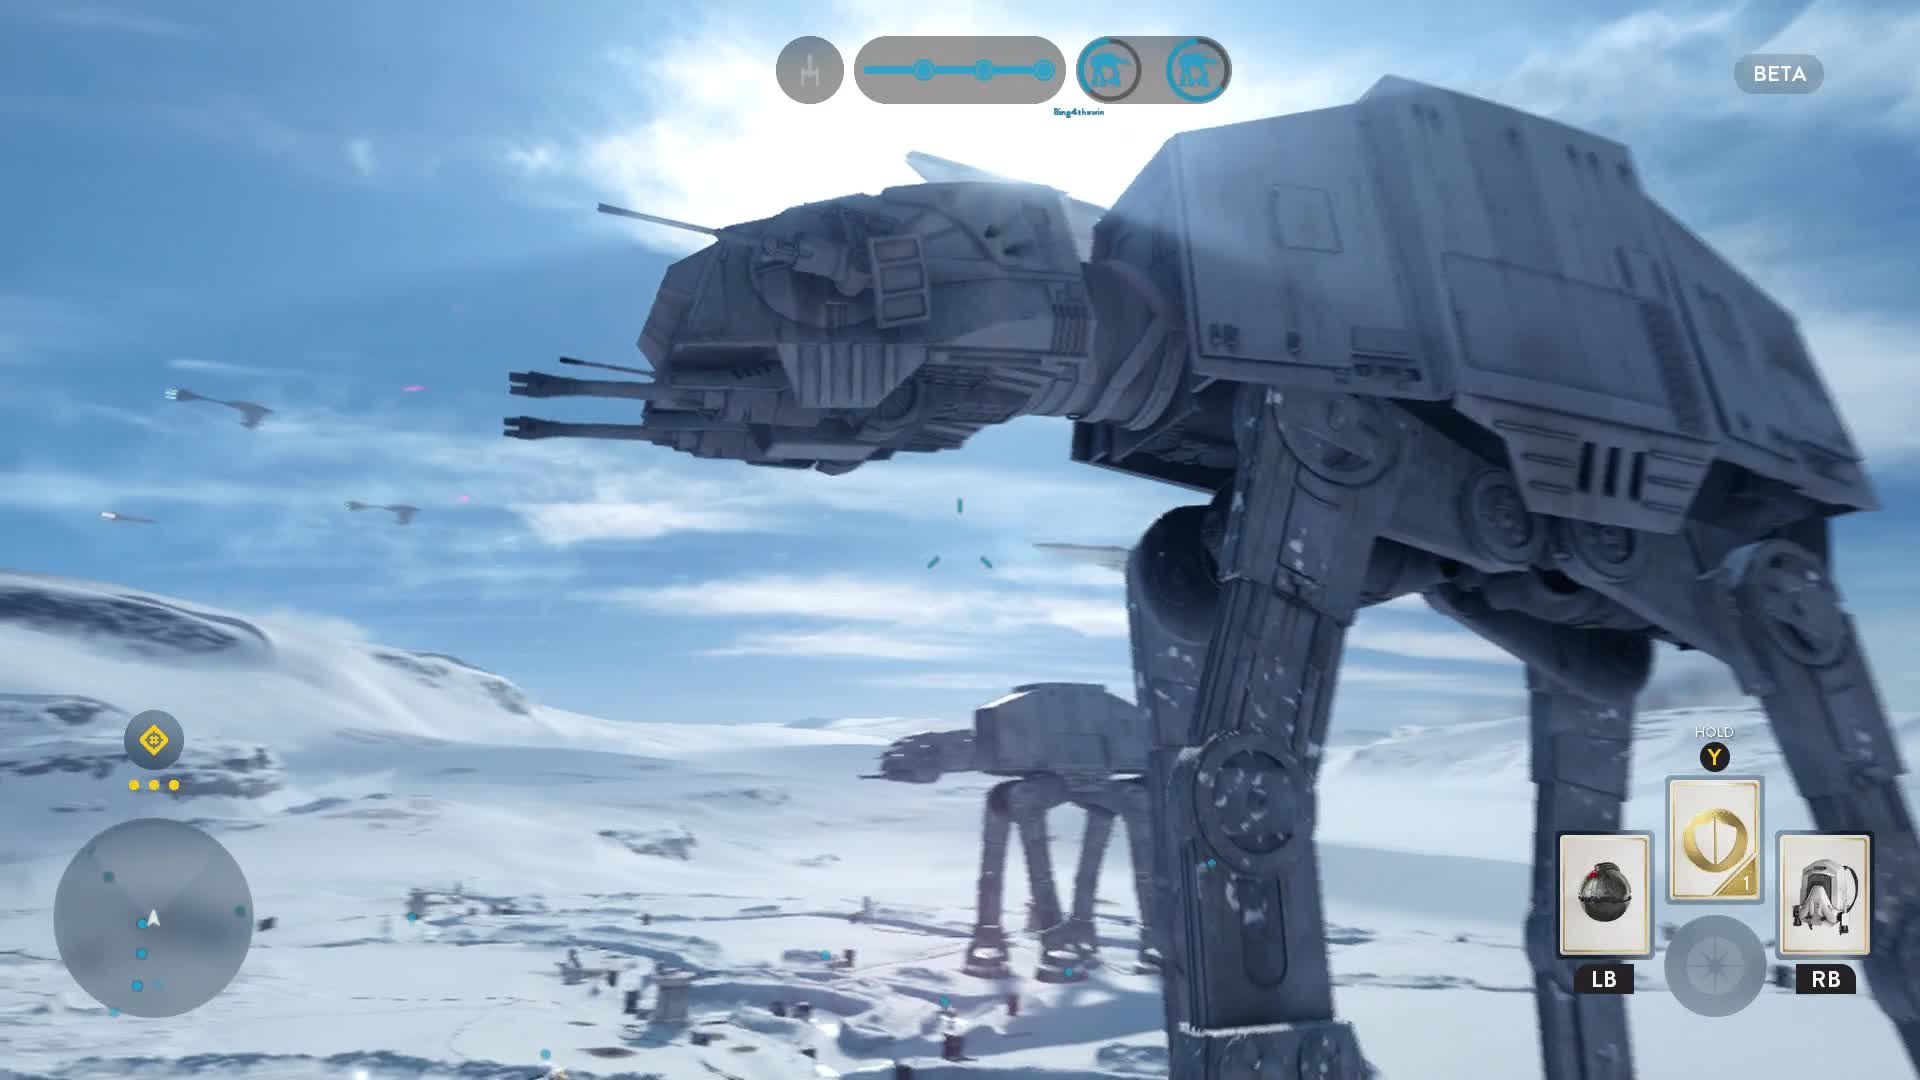 Star Wars (Battlefront 3) BETA - "AT-AT Walker vs Luke Skywalker" Hoth  Assault Let's Play (Xbox One) - video Dailymotion